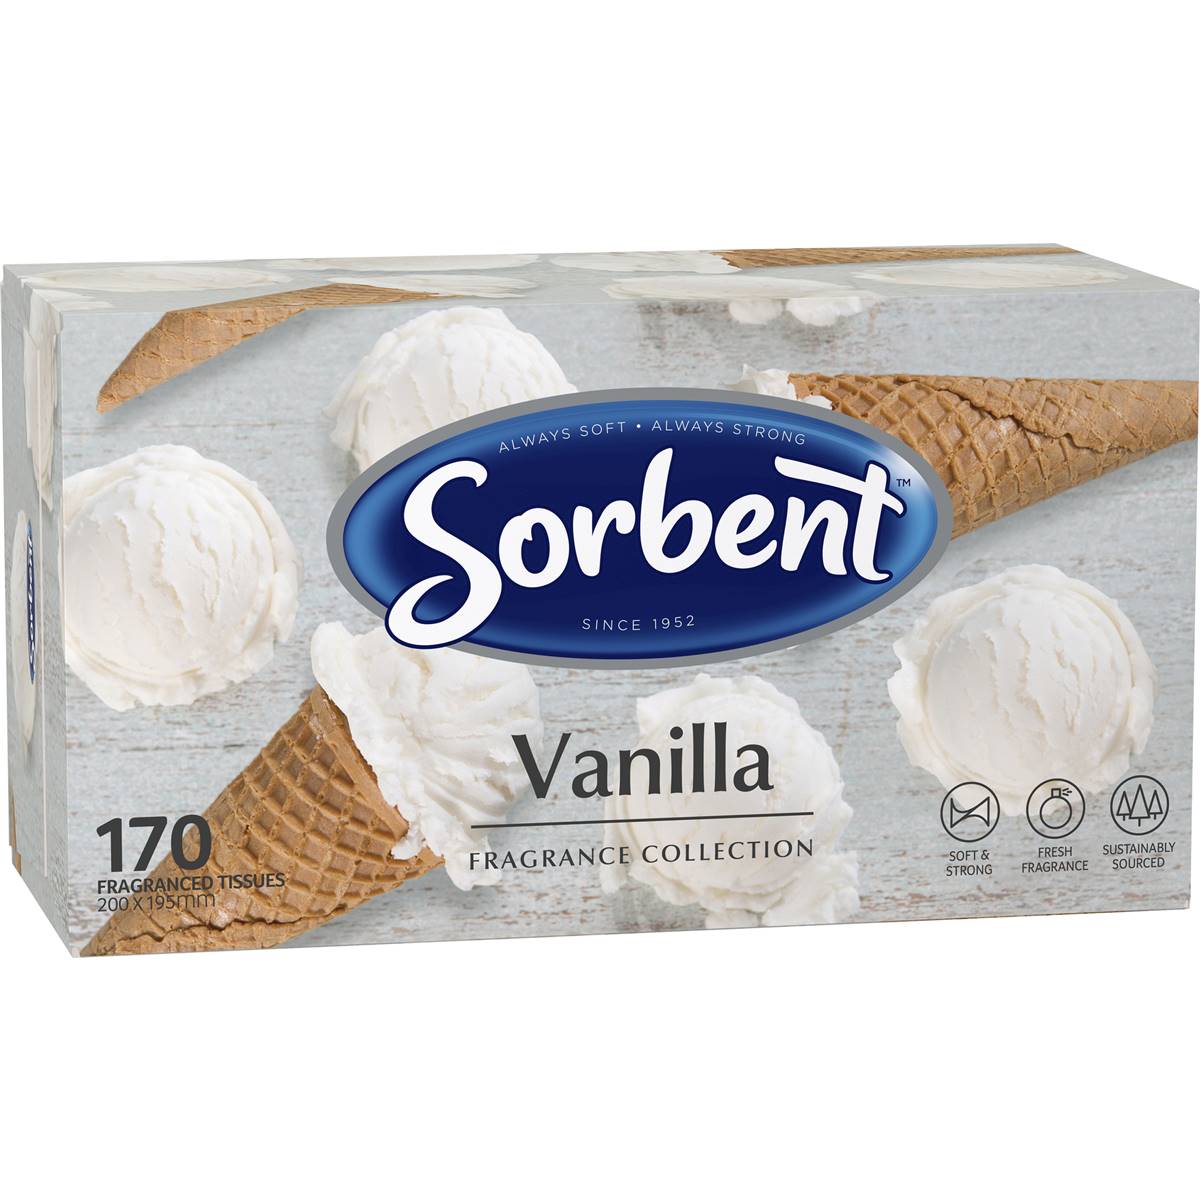 Sorbent Vanilla Fragrance Collection Facial Tissues 170 Pack